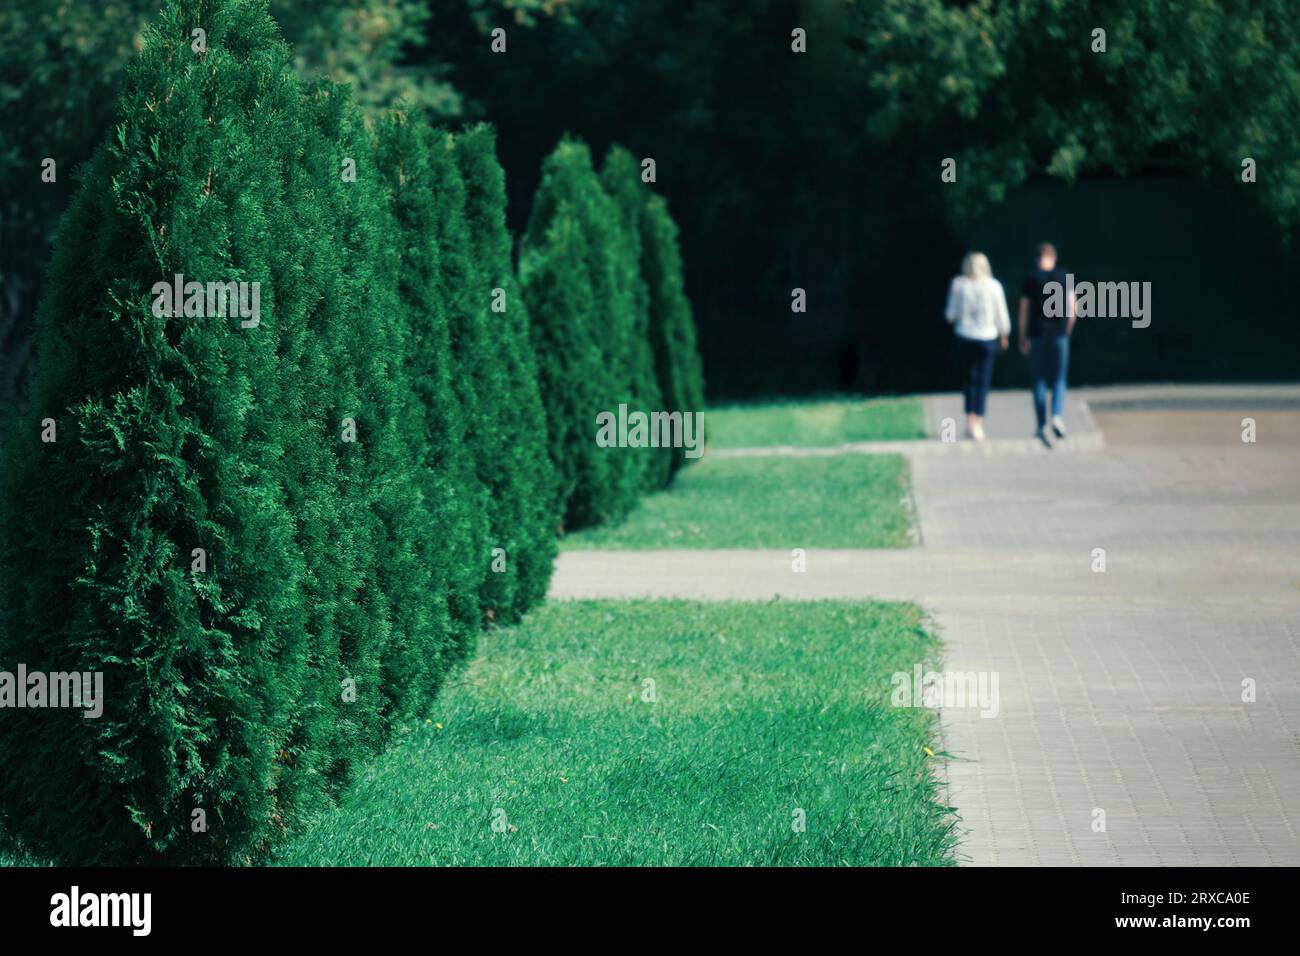 Couple walking in the park with green grass and trees in the background Stock Photo